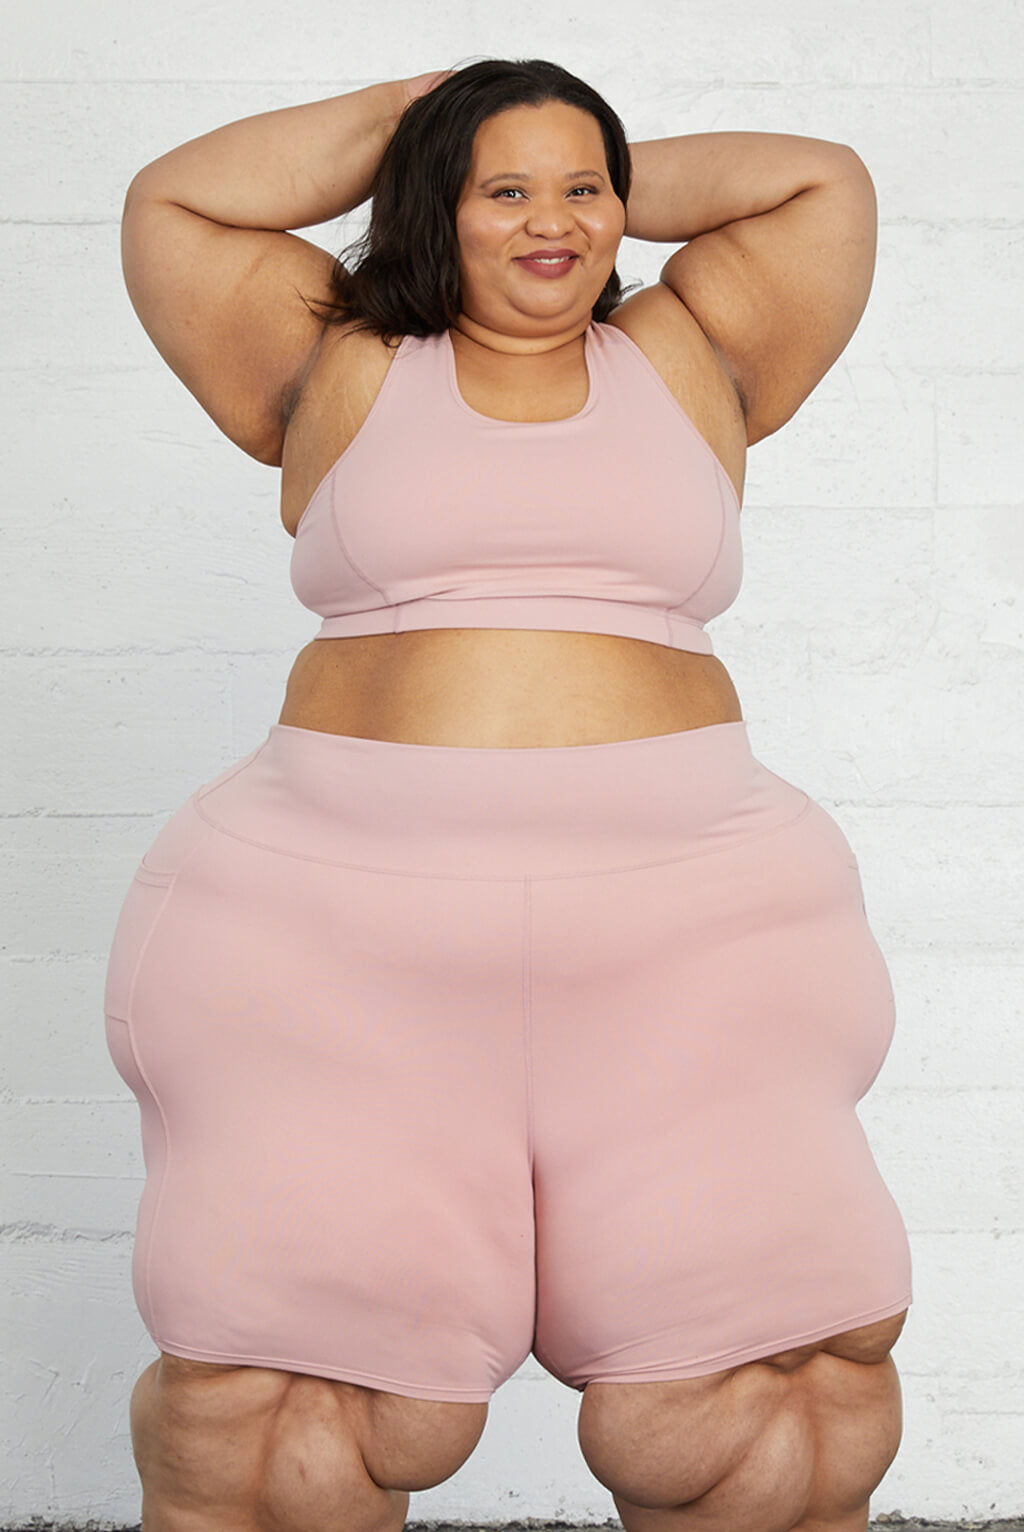 Refinery 29 - These Are Some Of The Coolest Plus-Size Bike Shorts